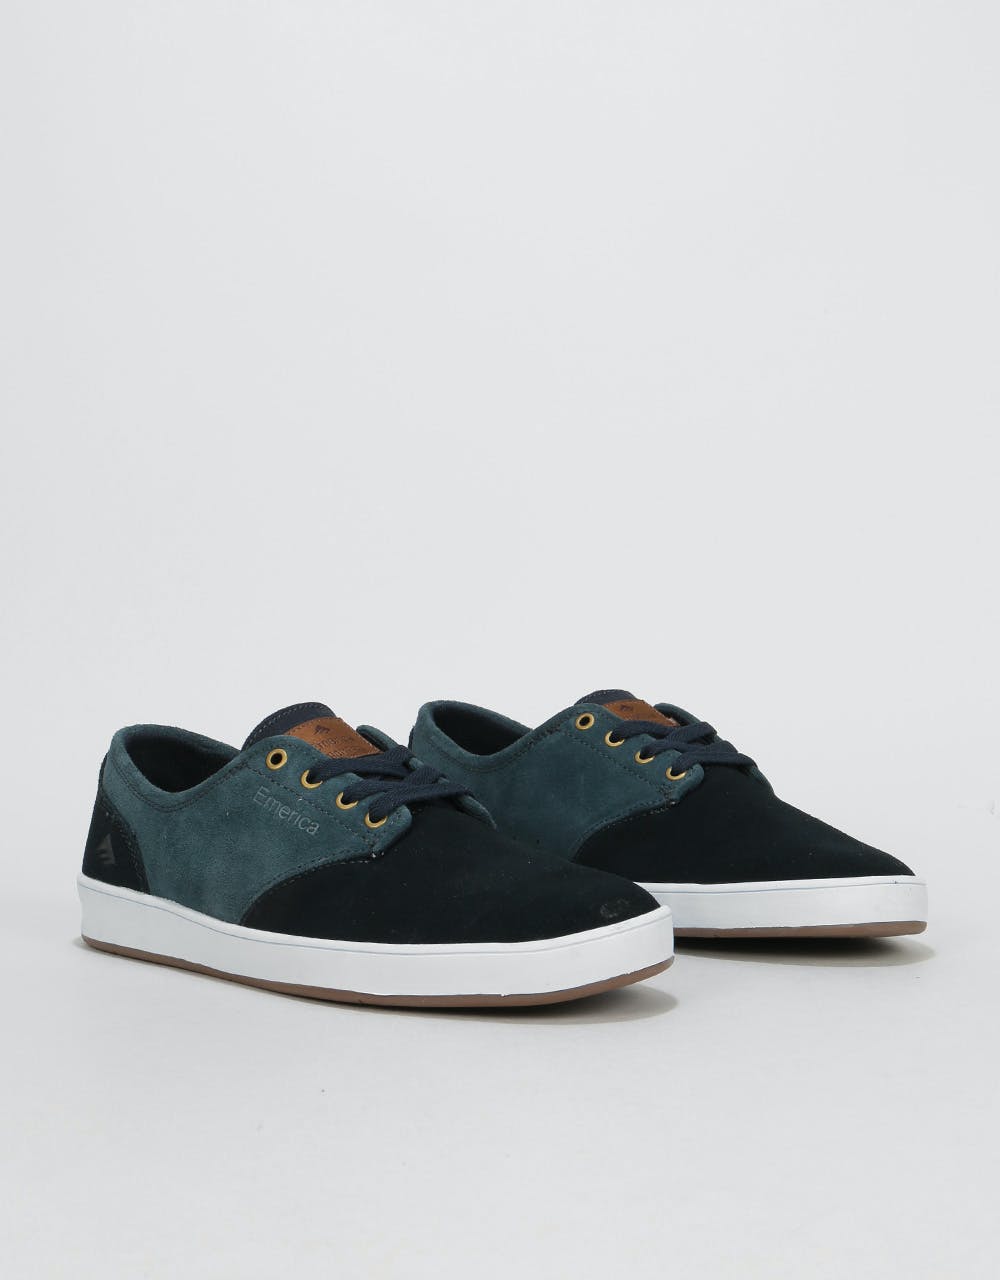 Emerica The Romero Laced Skate Shoes - Navy/Blue/Gold